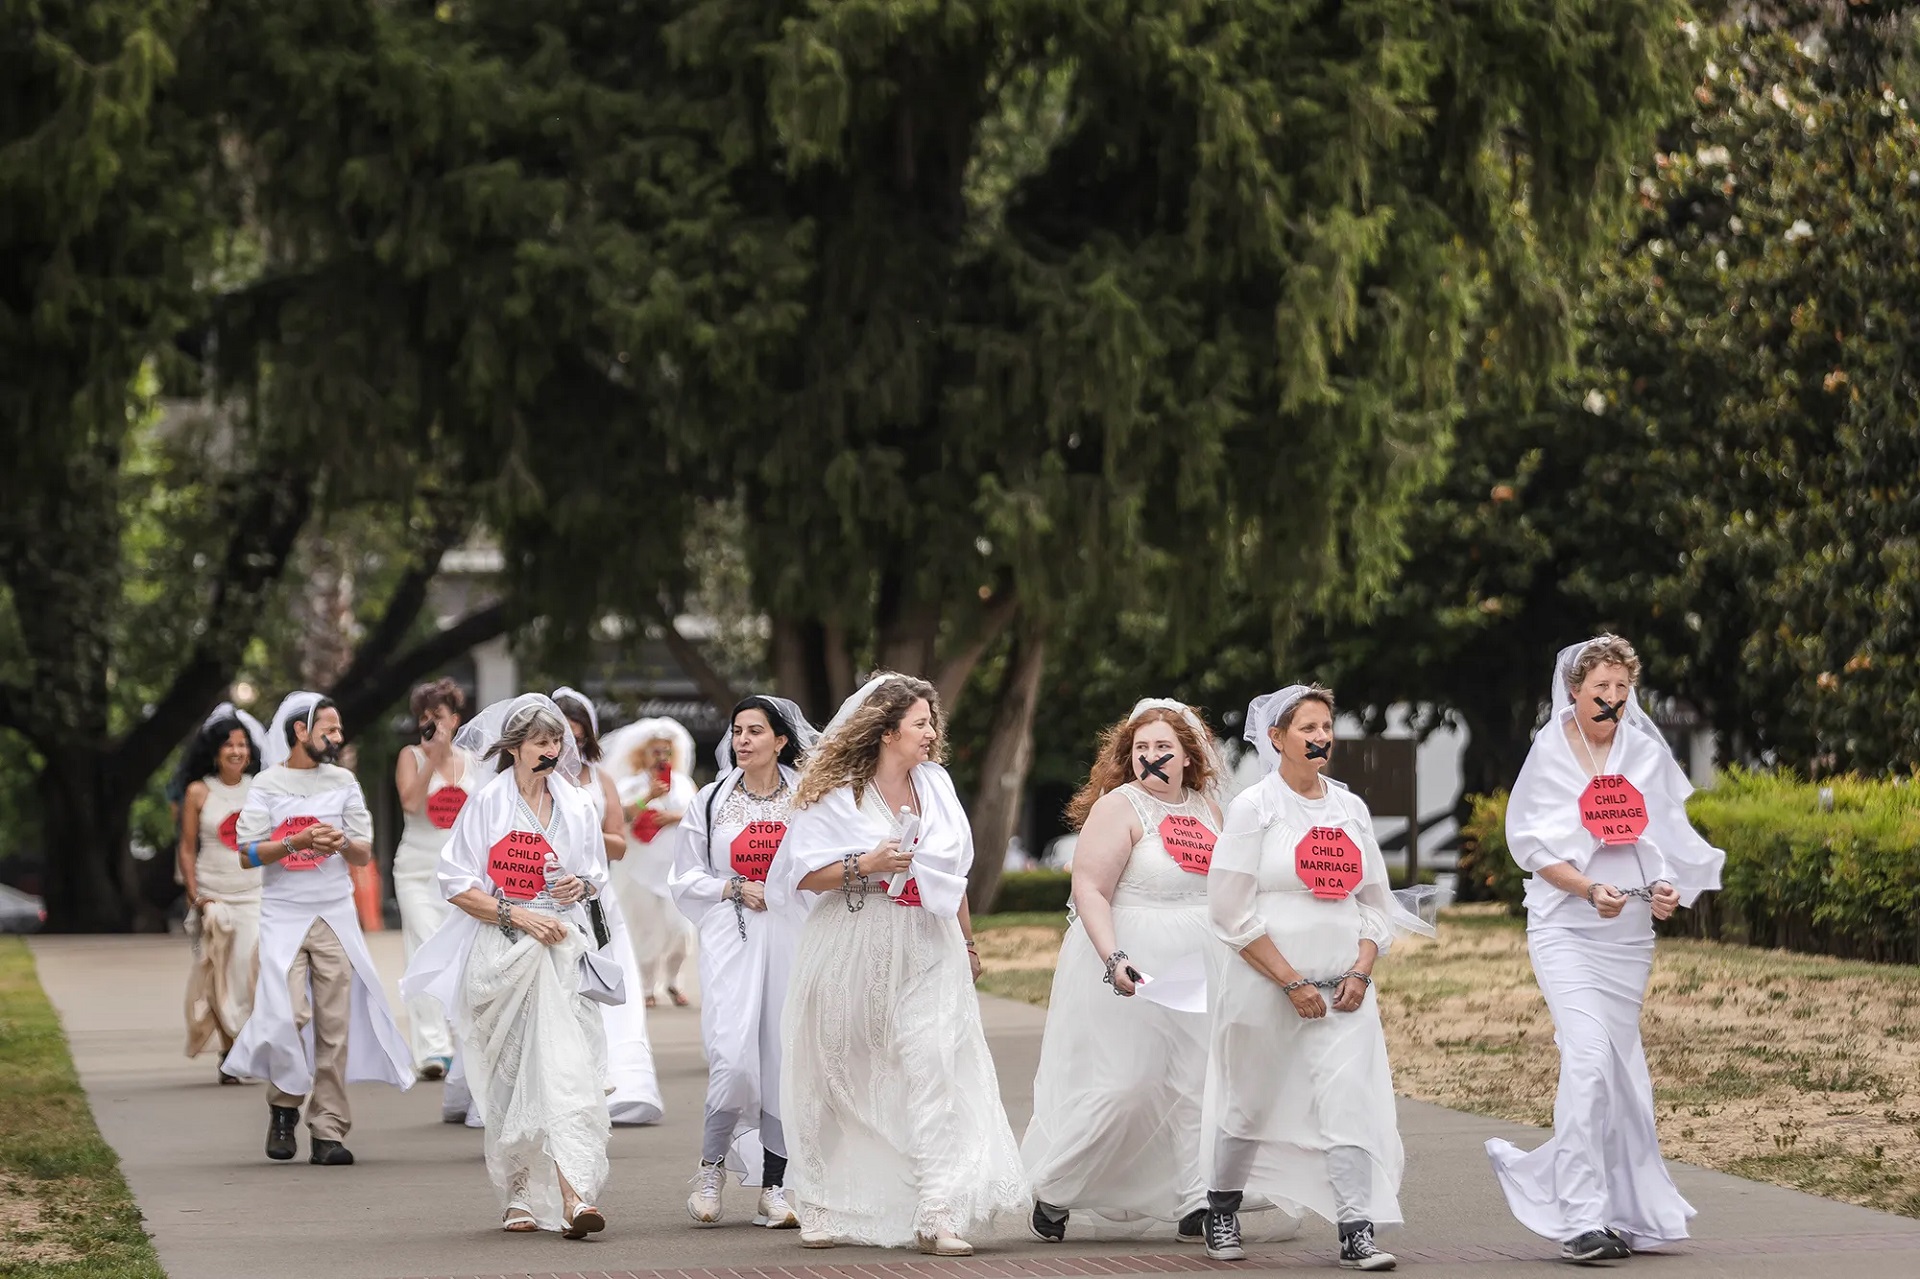 California Child Bride Survivors Protest to Outlaw Underage Marriage KQED